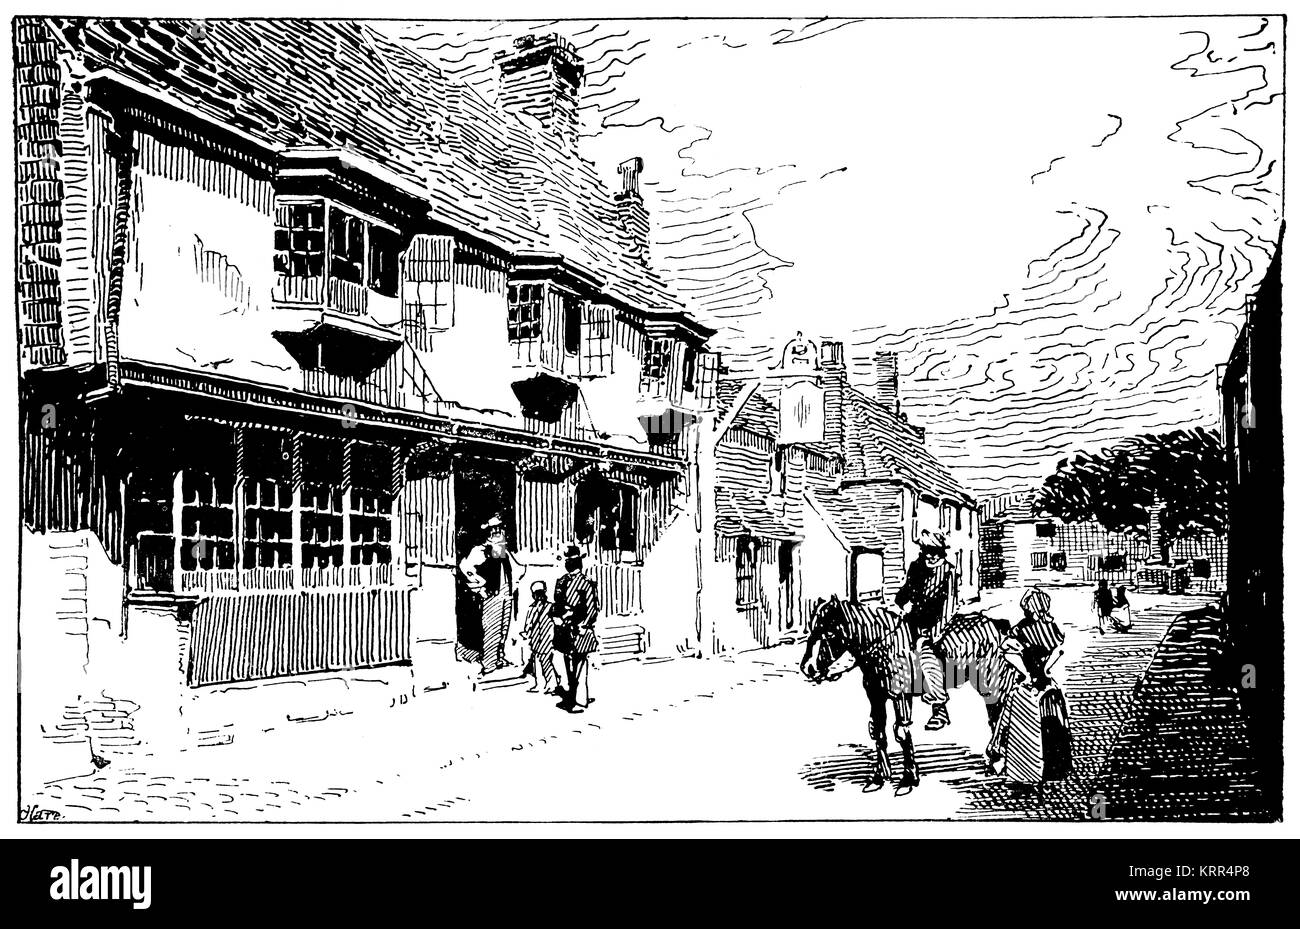 Timber framed old village pub, early  illustration by James Simpson Alderson, of Rugby, from 1894 Studio Magazine competition Stock Photo